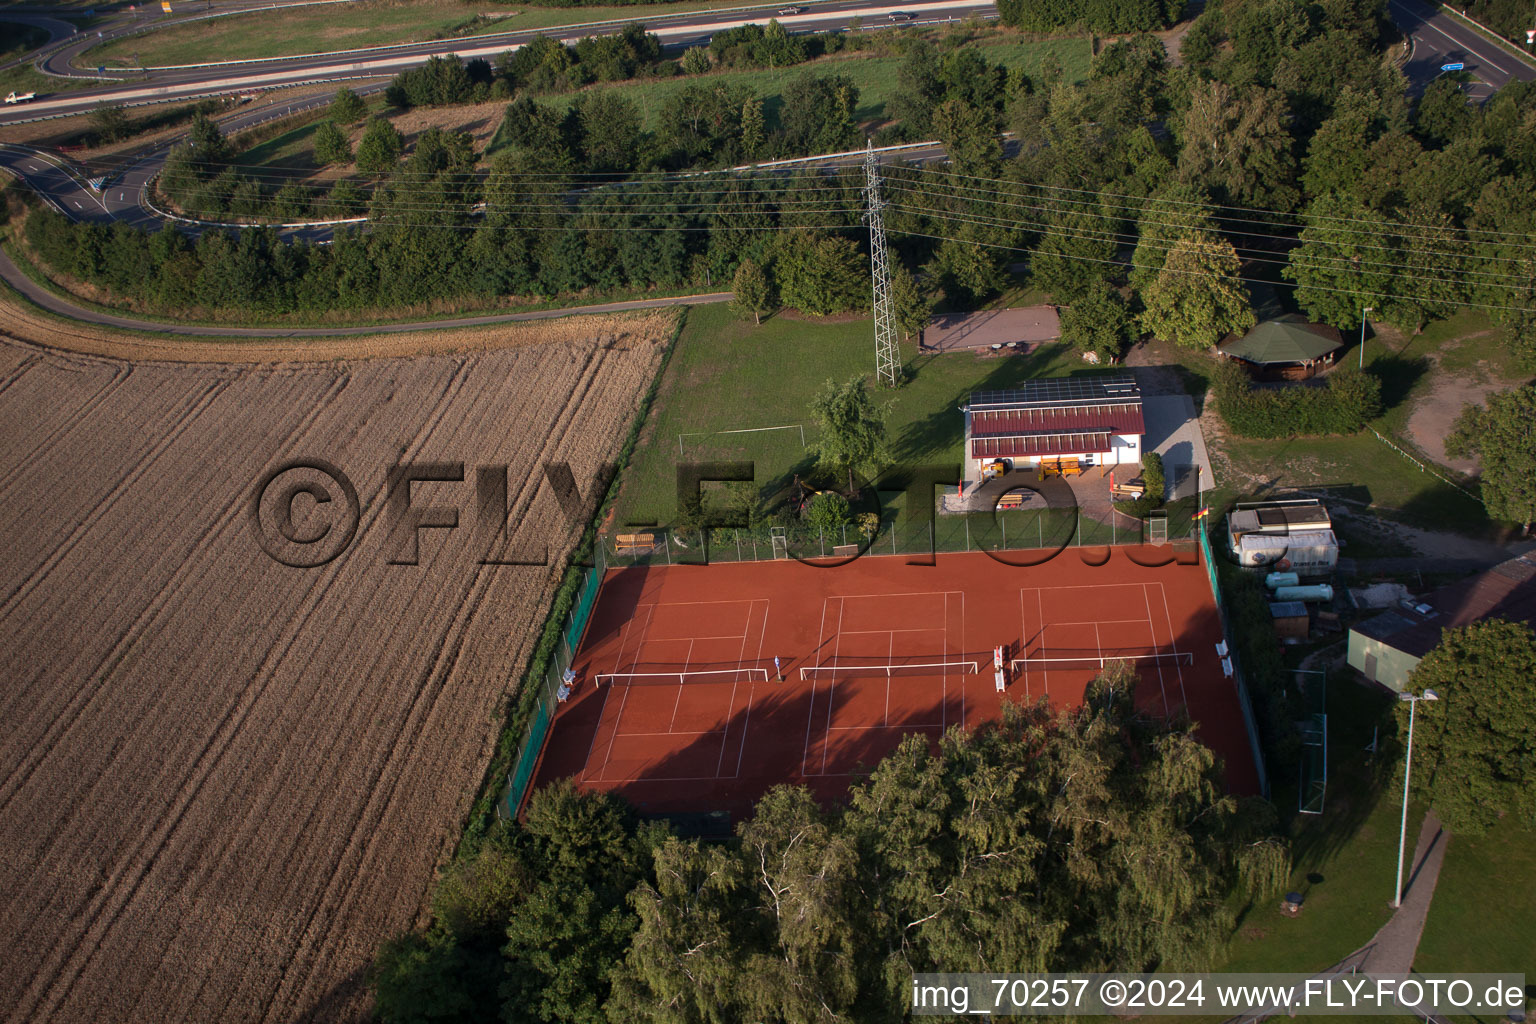 Aerial photograpy of Tennis club in Erlenbach bei Kandel in the state Rhineland-Palatinate, Germany